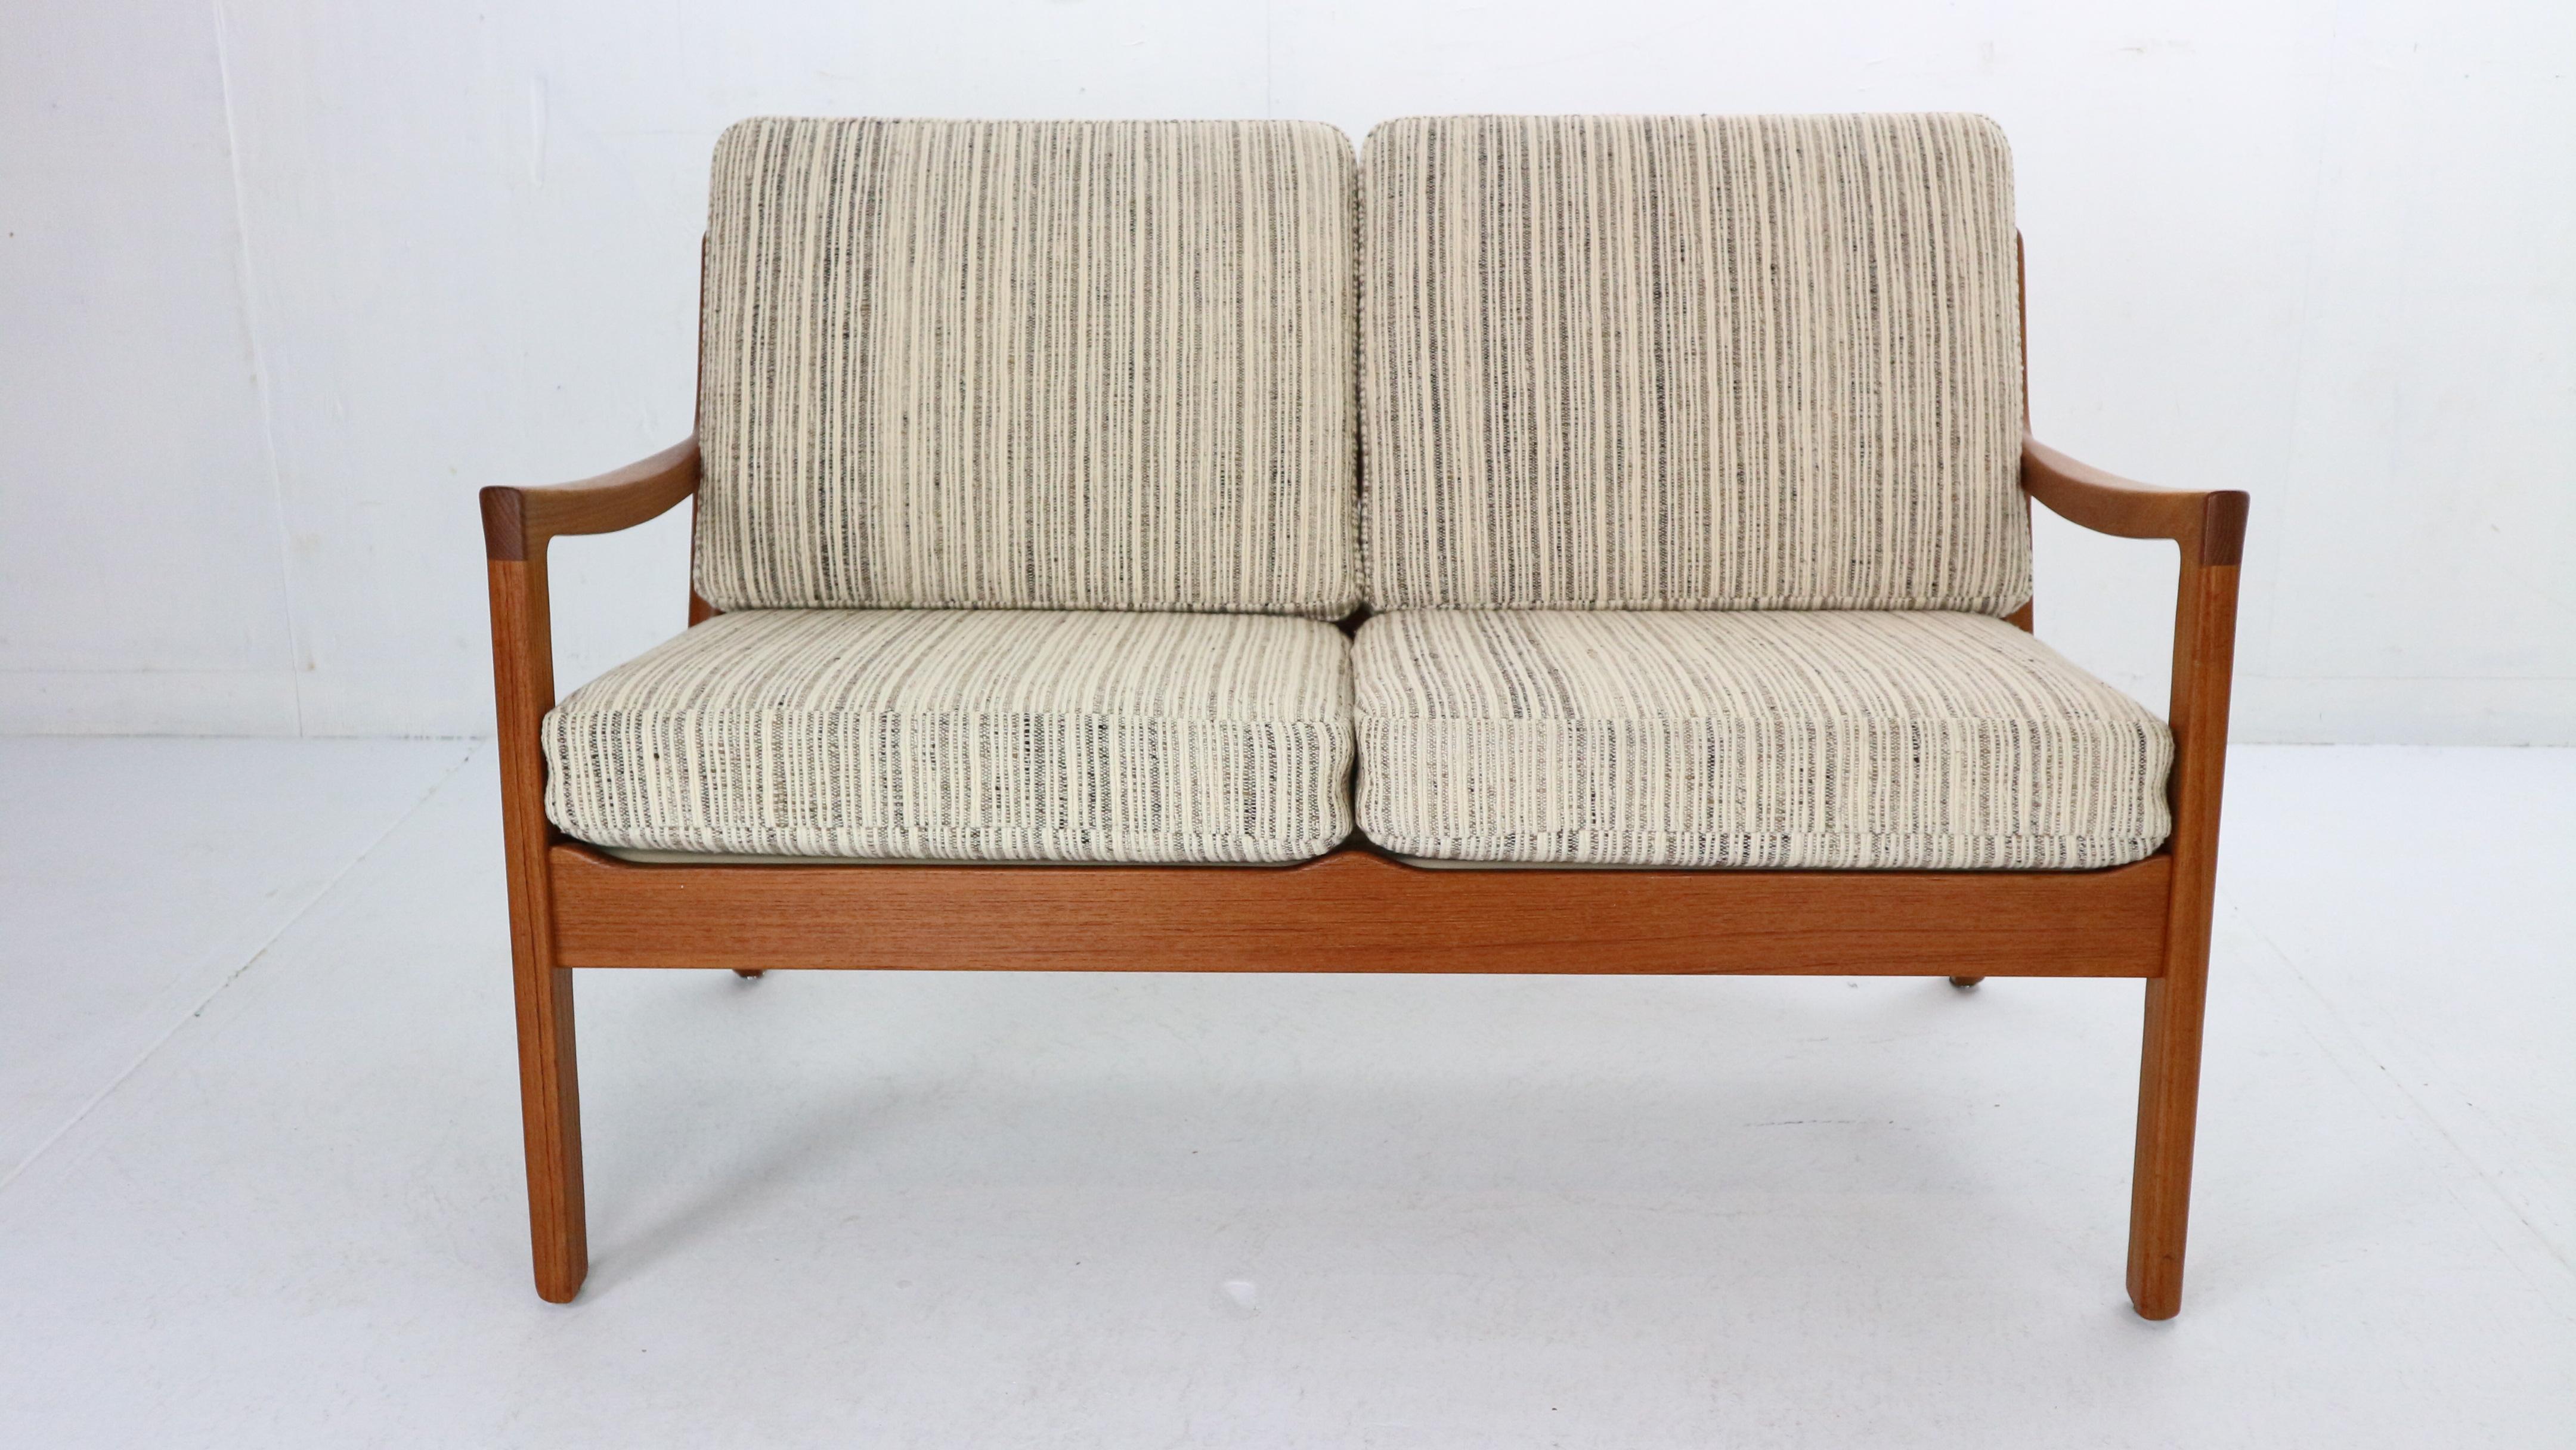 Two seater sofa designed by Ole Wanscher for France & Søn in Denmark, 1960's.
Model ’Senator 166’, originally marked on the frame.
This Senator series maintains features a study teak wood frame with a slated open back and angled and curved legs &